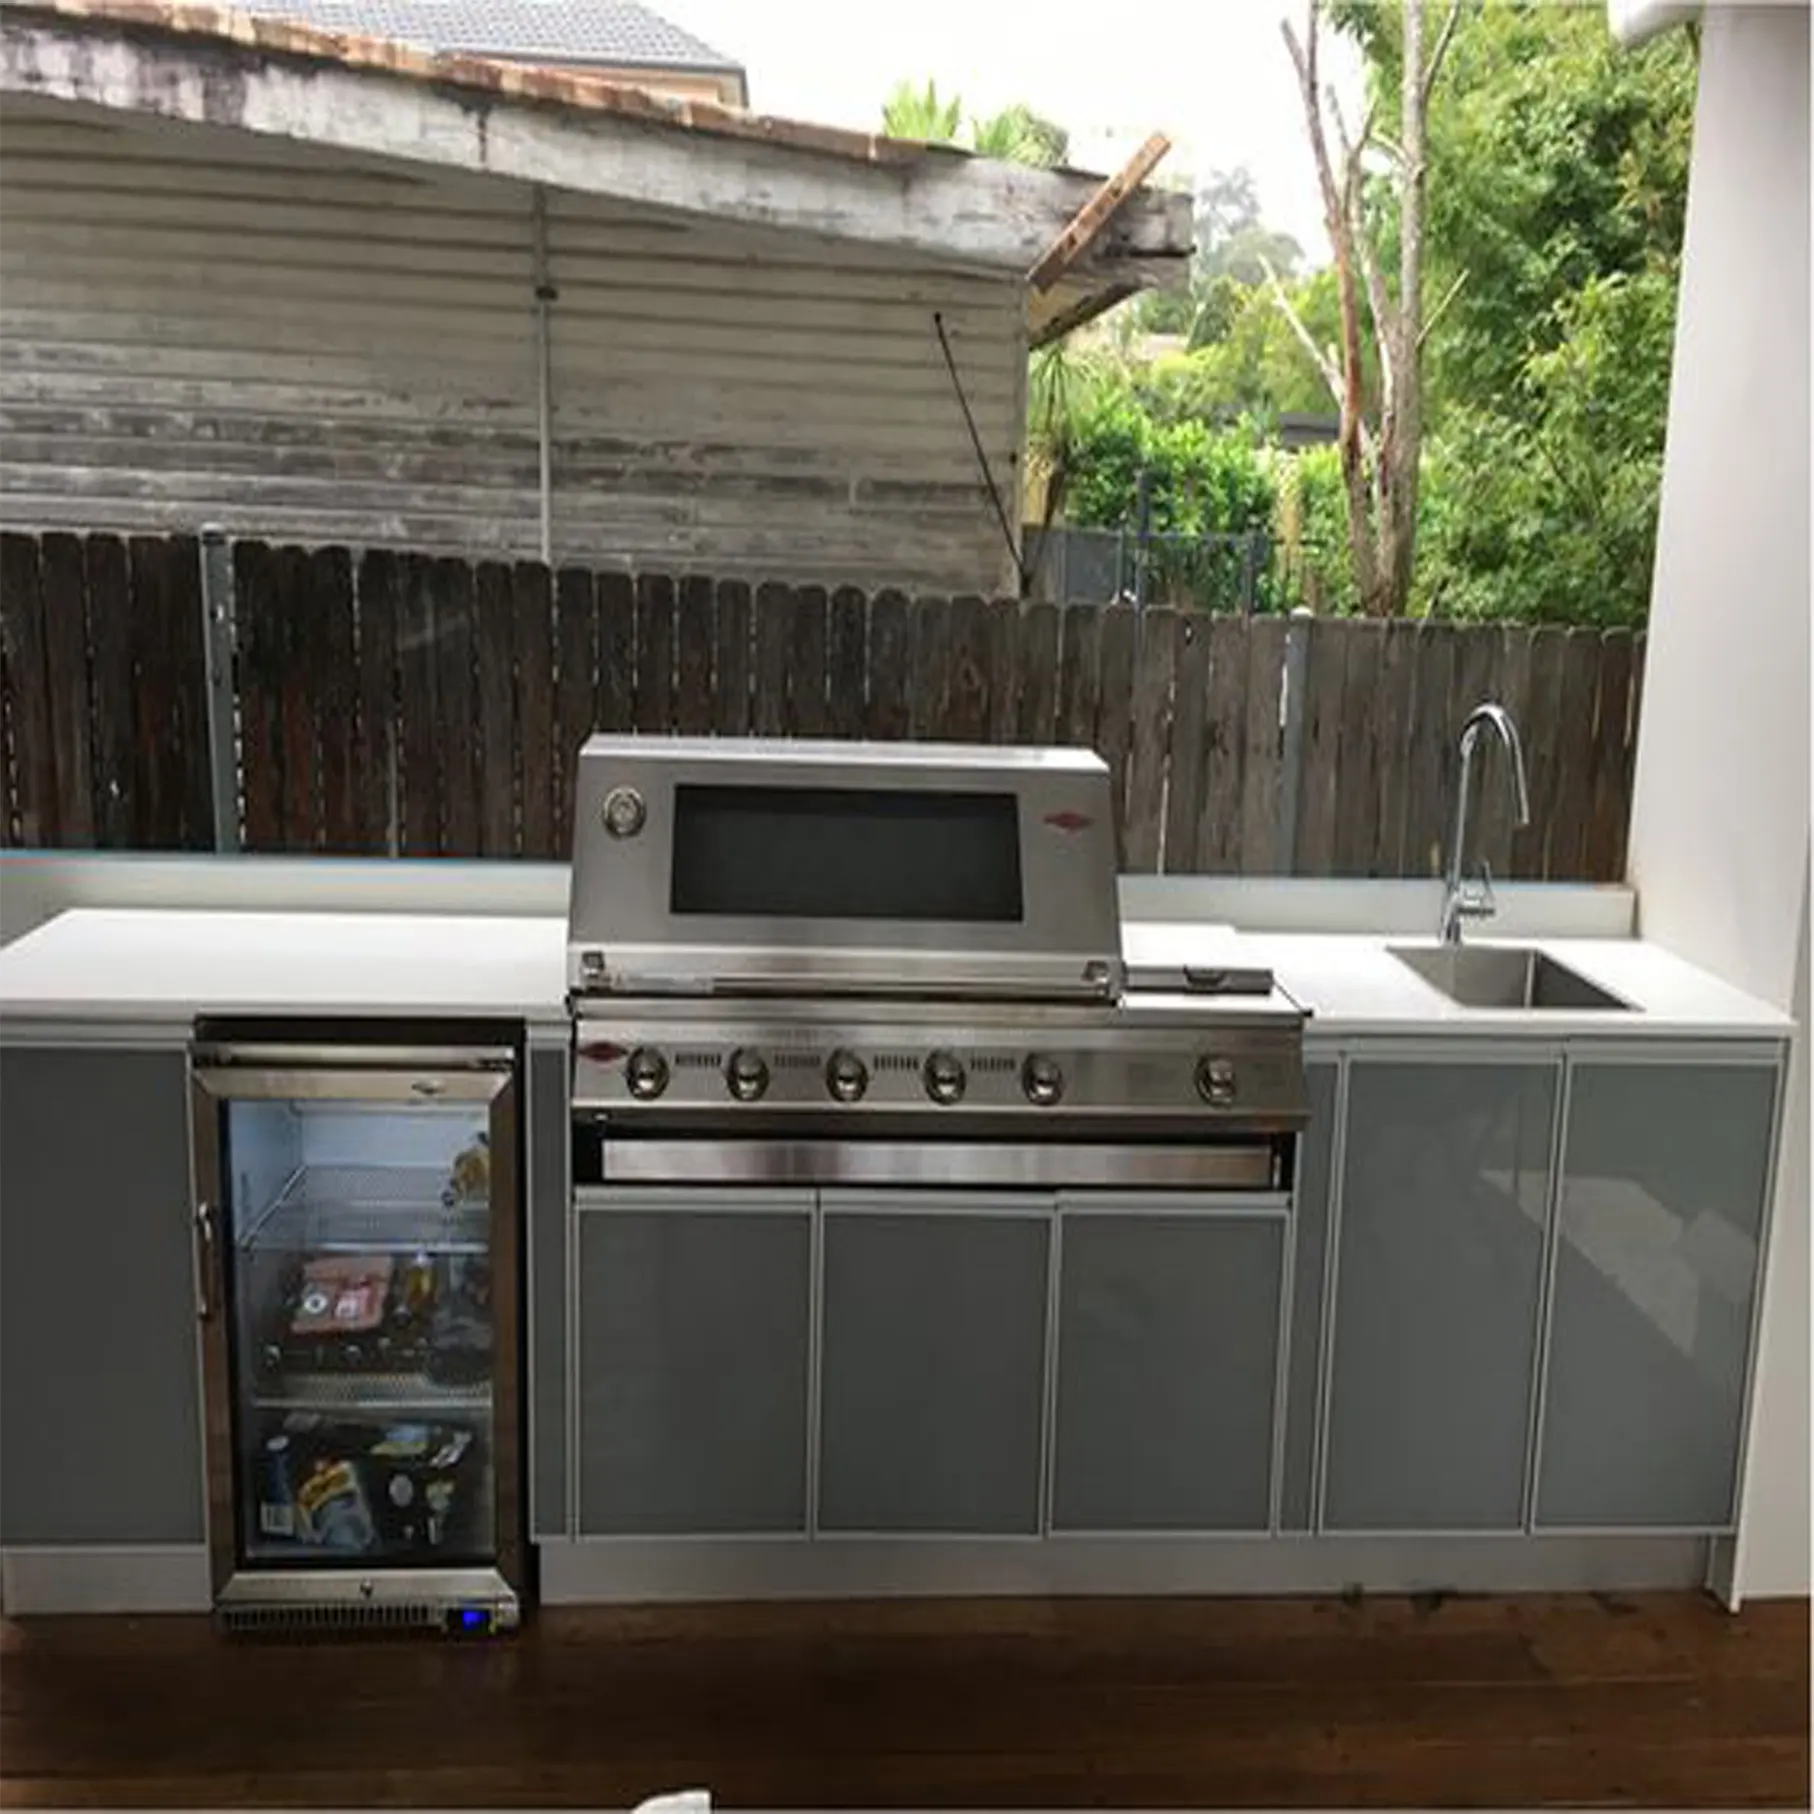 New Design Outdoor Kitchen Stainless Steel Cabinet with Gas BBQ Grill